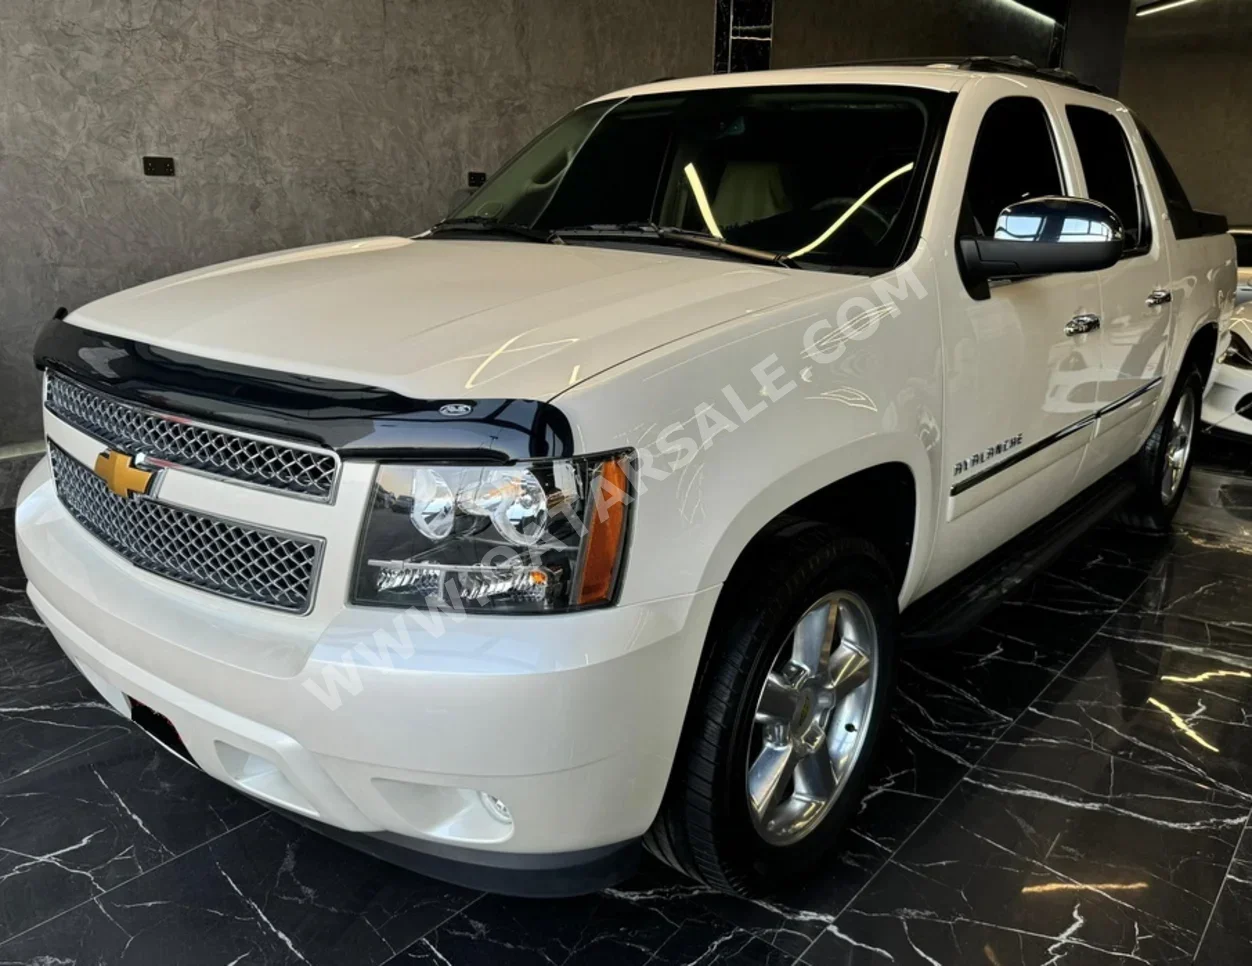 Chevrolet  Avalanche  LTZ  2012  Automatic  11,000 Km  8 Cylinder  Four Wheel Drive (4WD)  Pick Up  White